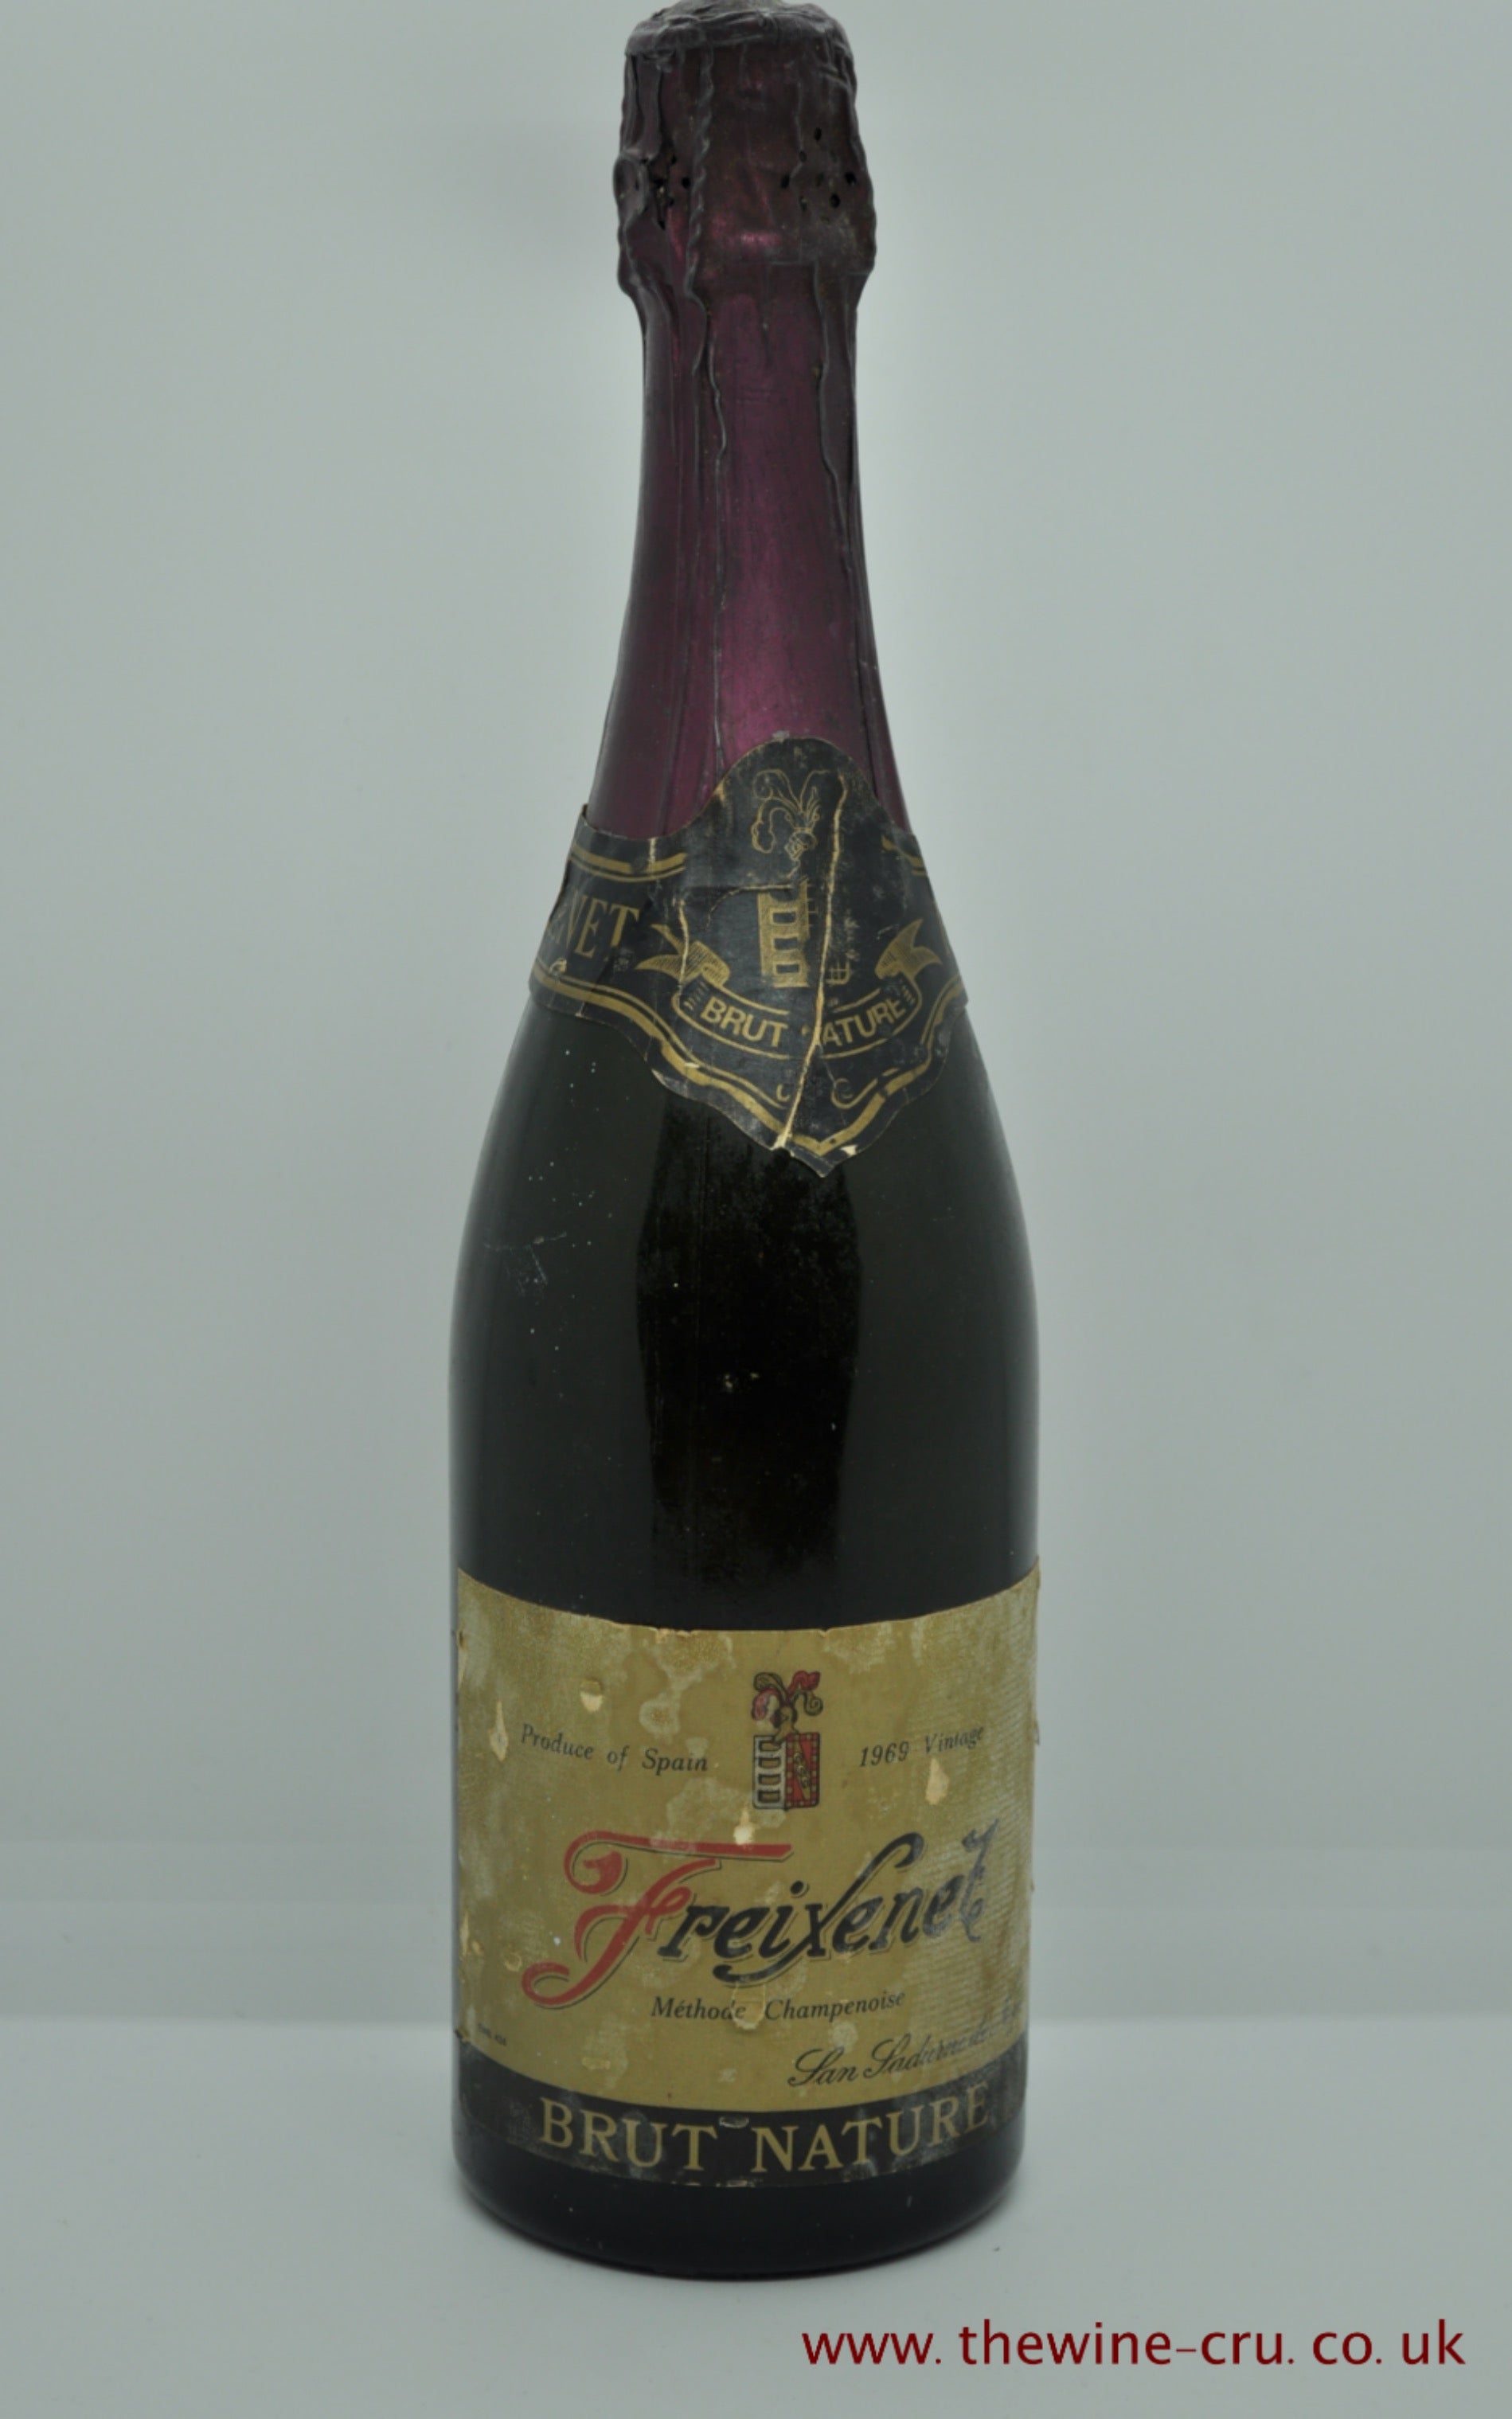 1969 vintage sparkling white wine. Freixenet Brute Nature Vintage 1969. Immediate delivery. free local delivery. Gift wrapping available.